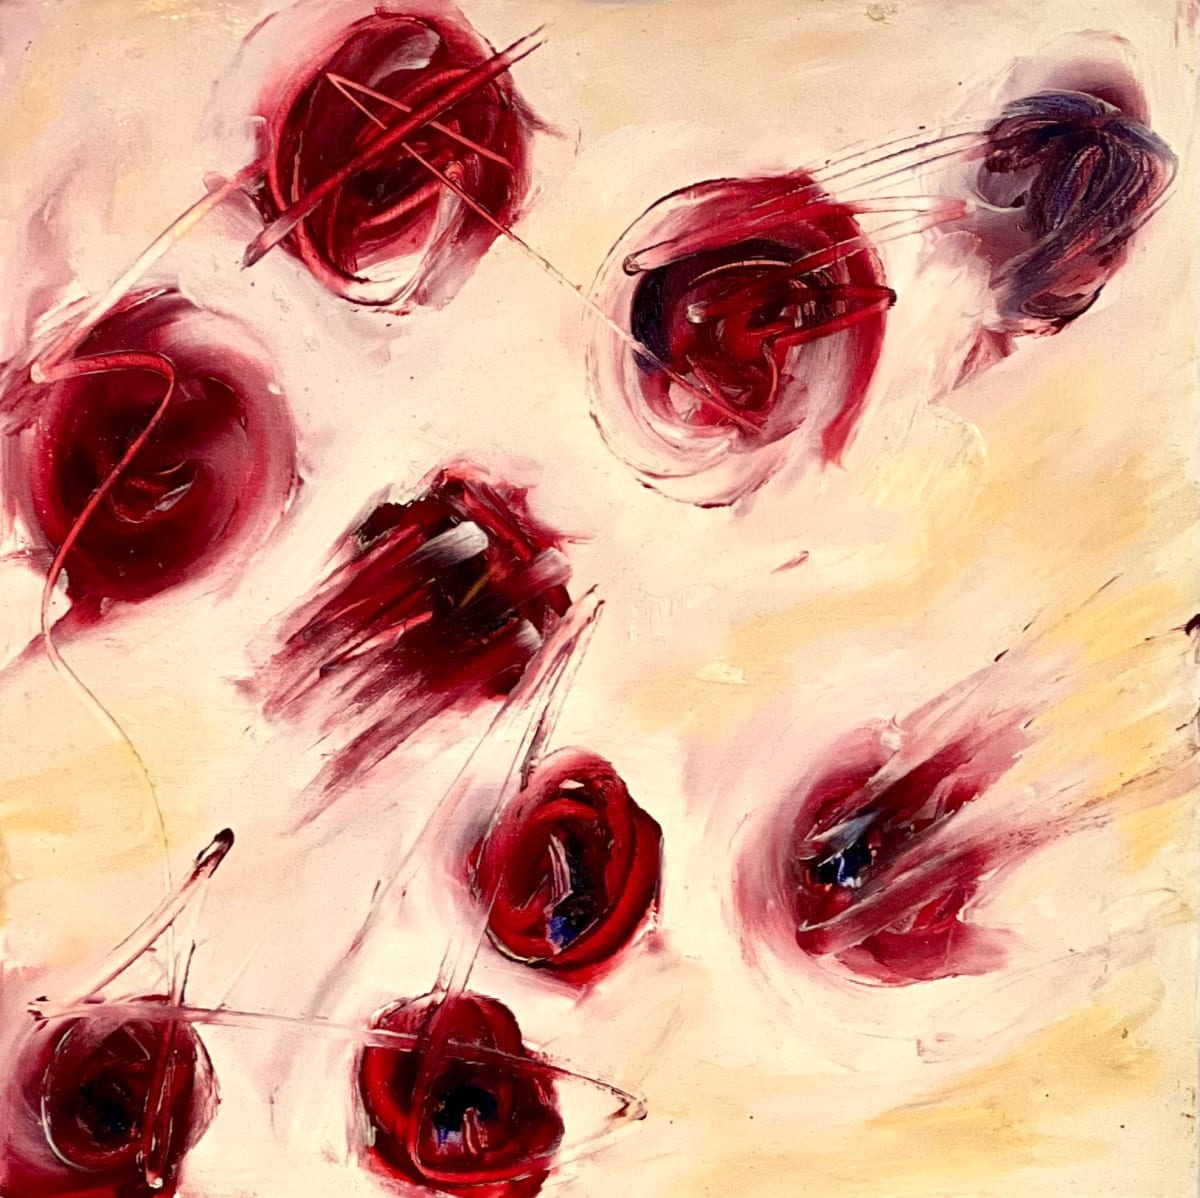 Shining IV by Linda Sirow  Image: client said these reminded him of roses